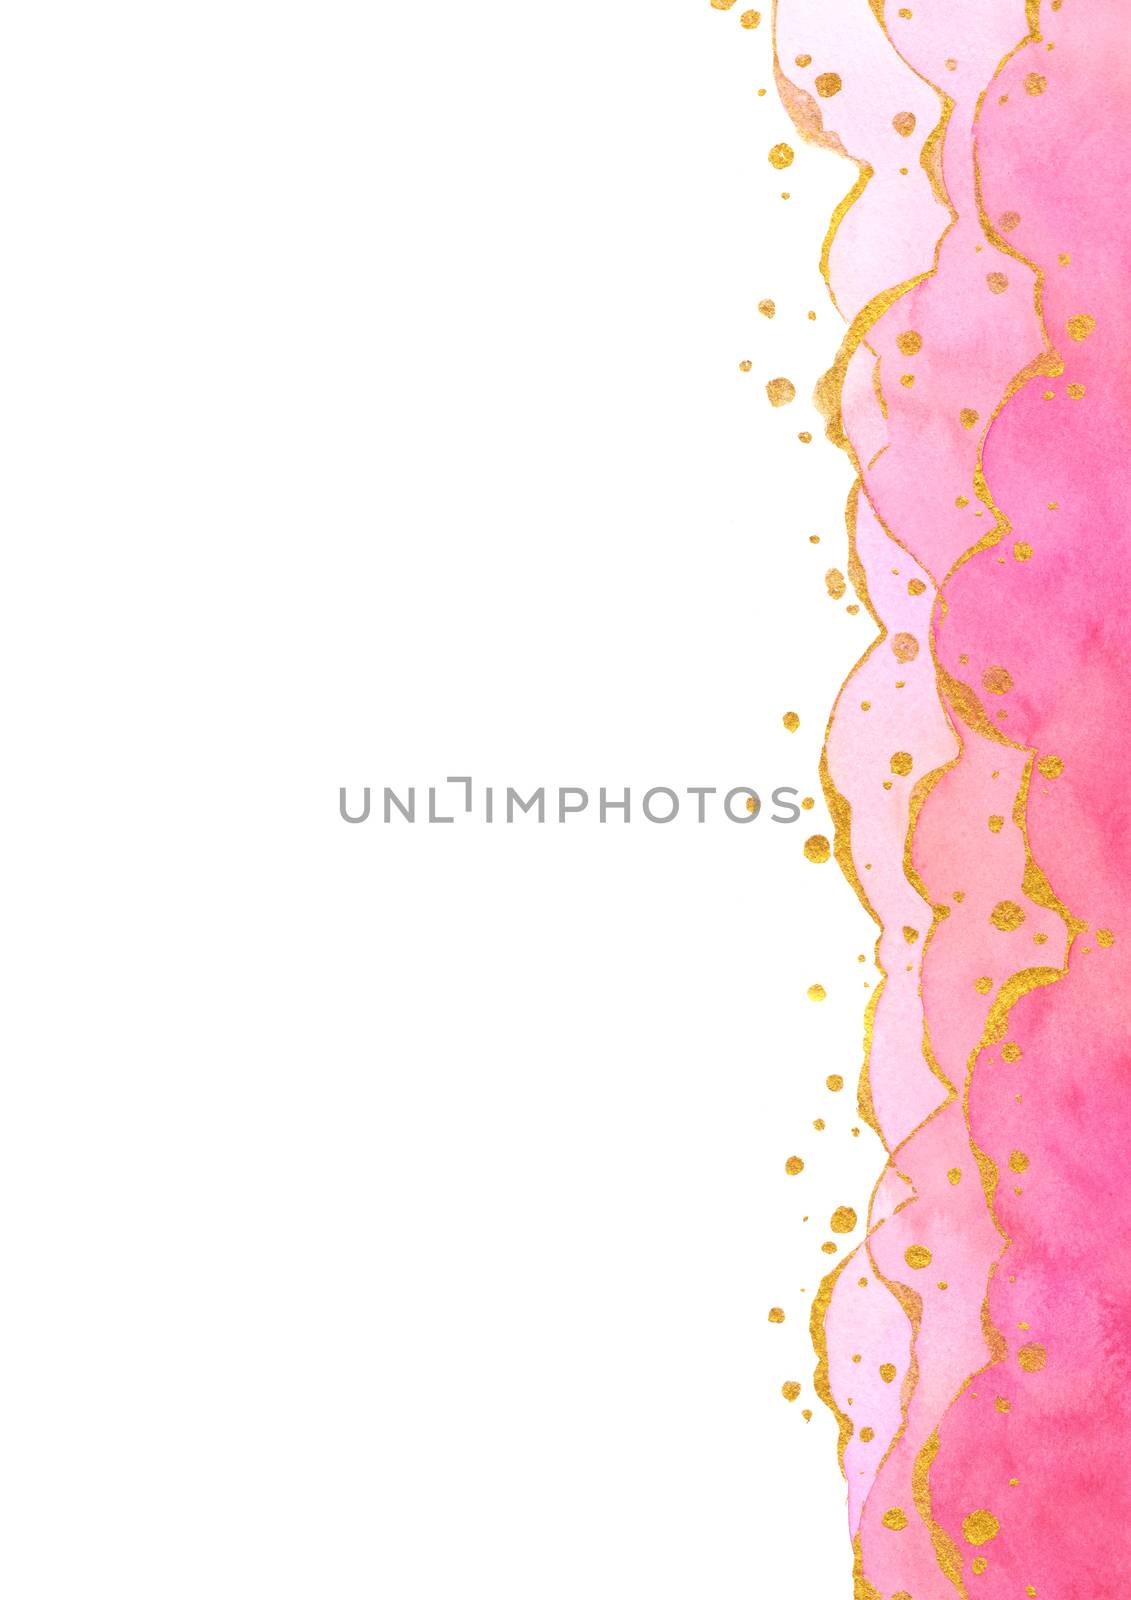 Abstract watercolor hand painting illustration. Bright pink wavy background. High resolution. Design for card, cover, print,web, wedding, valentine.